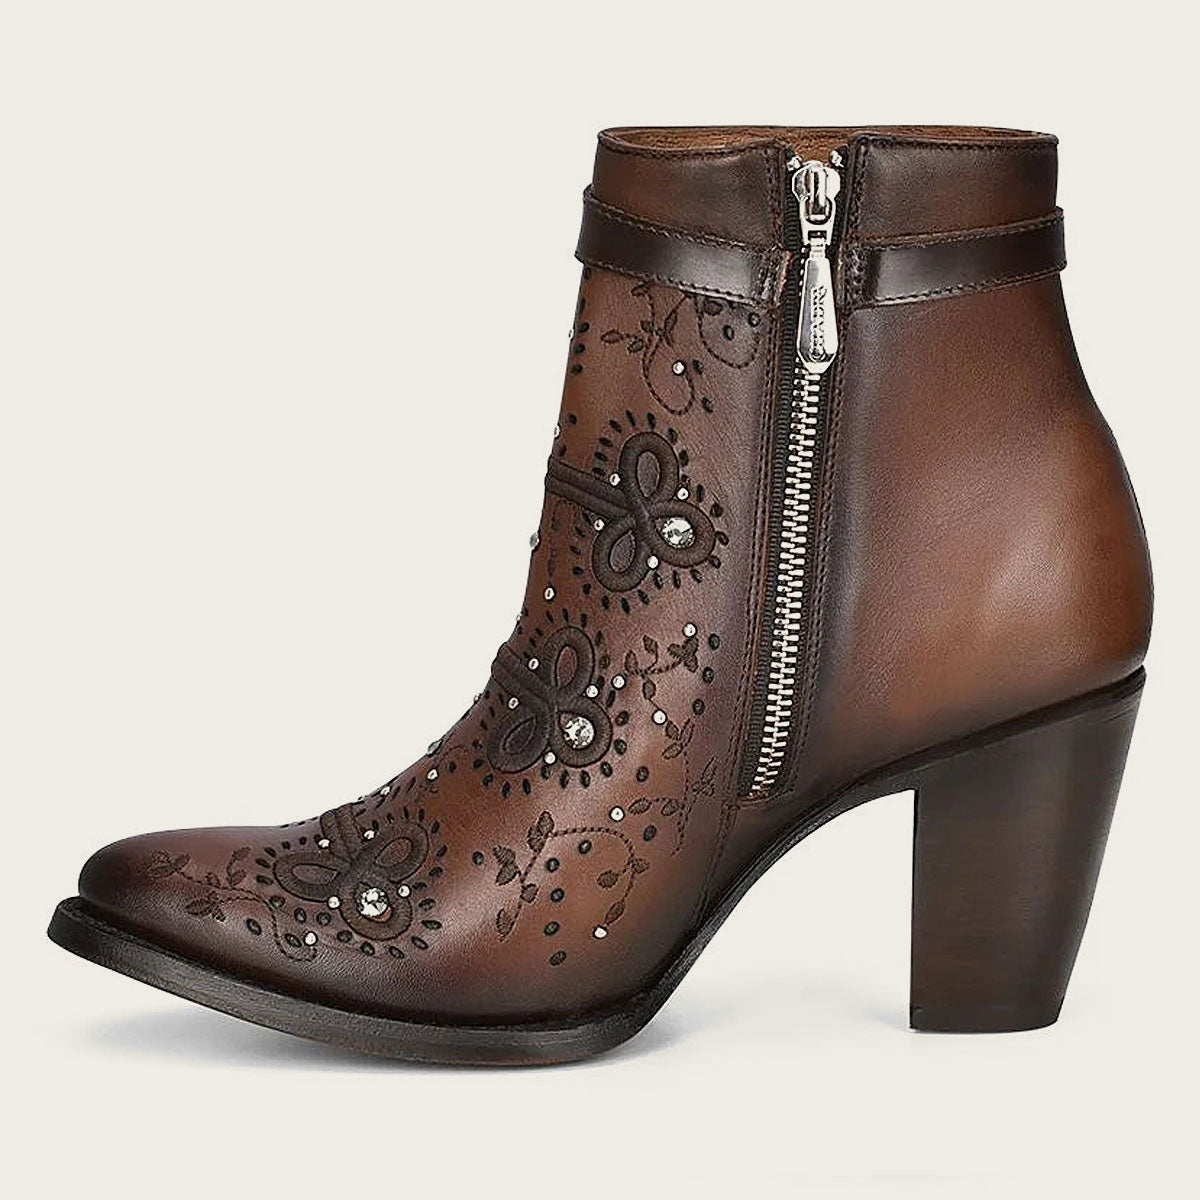 Brown perforated and embroidery bootie with crystals